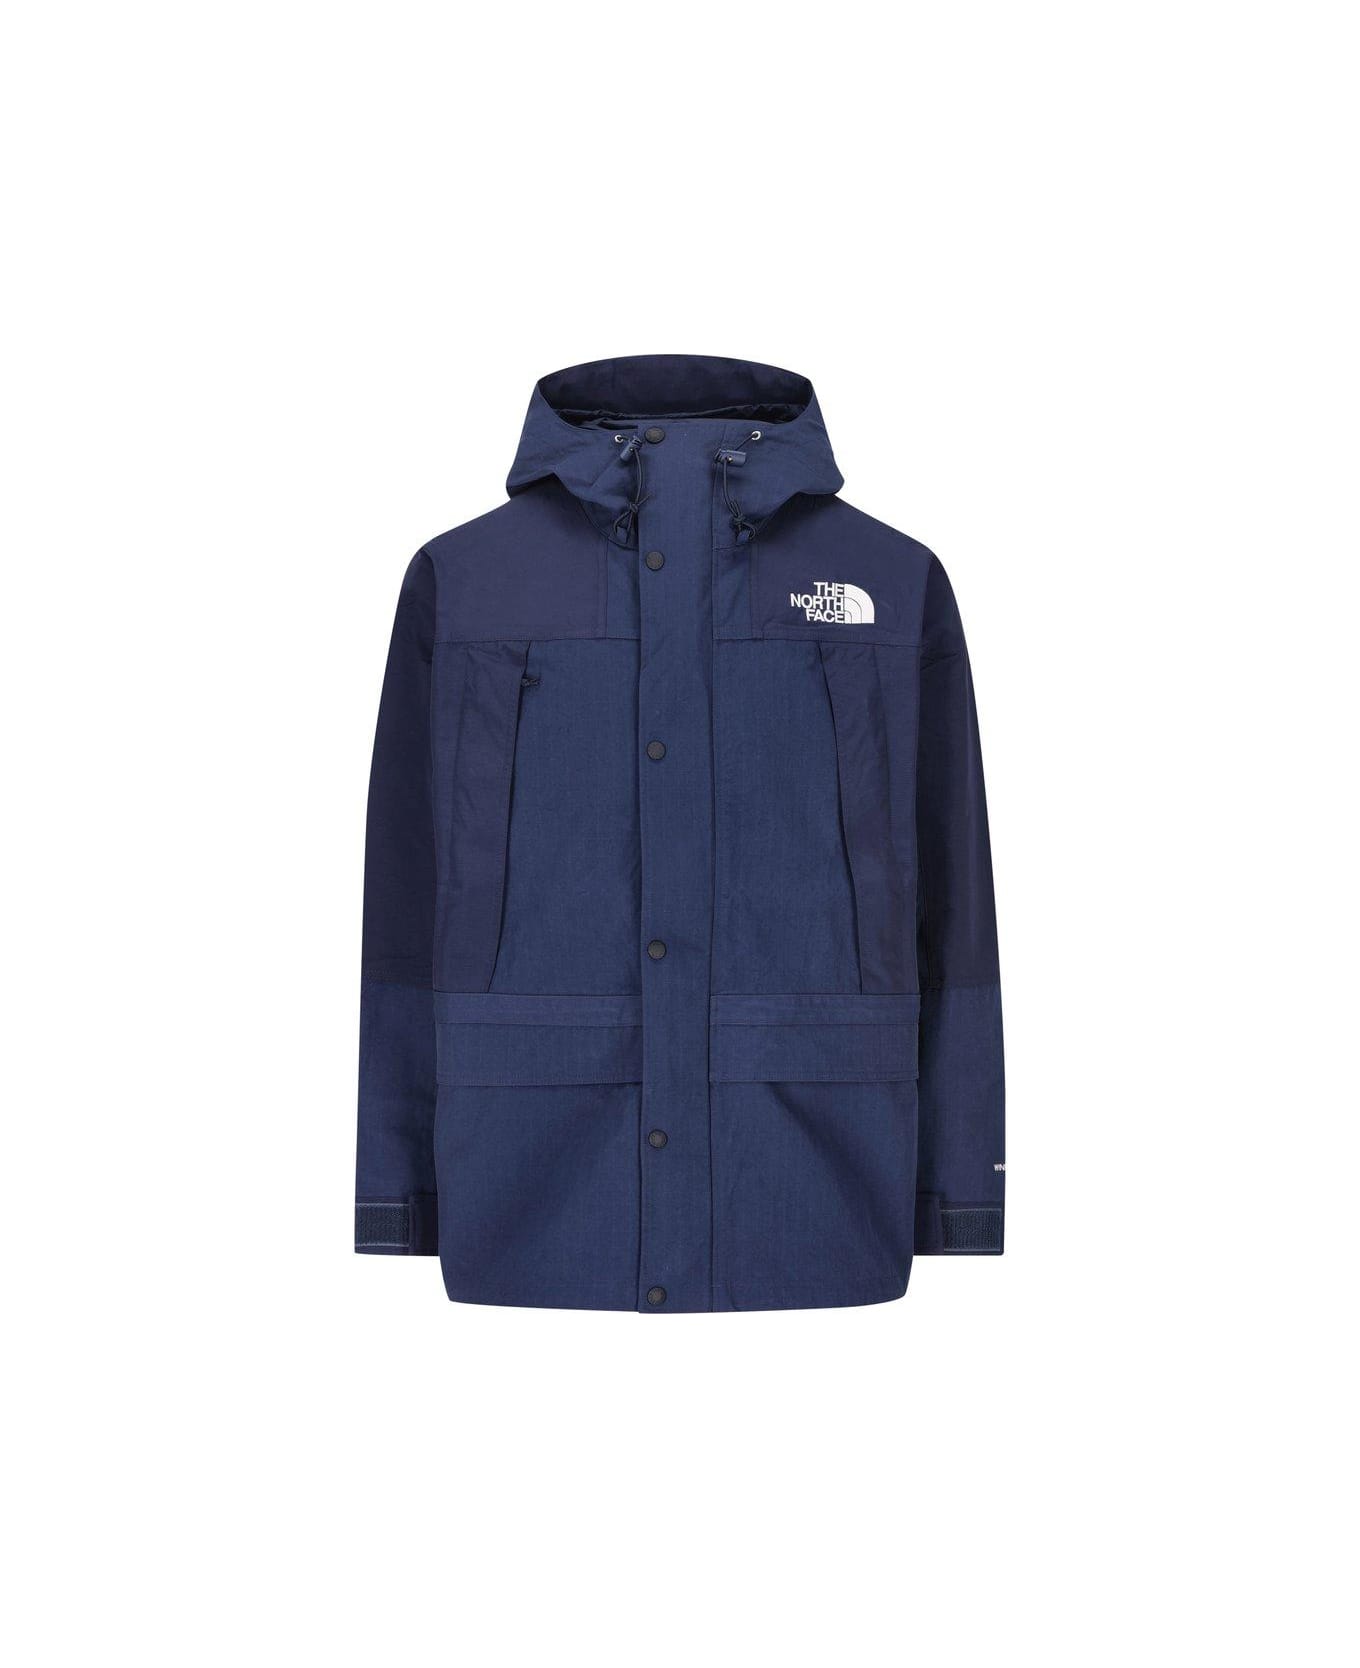 The North Face Ripstop Mountain Logo Embroidered Hooded Jacket - BLUE ジャケット